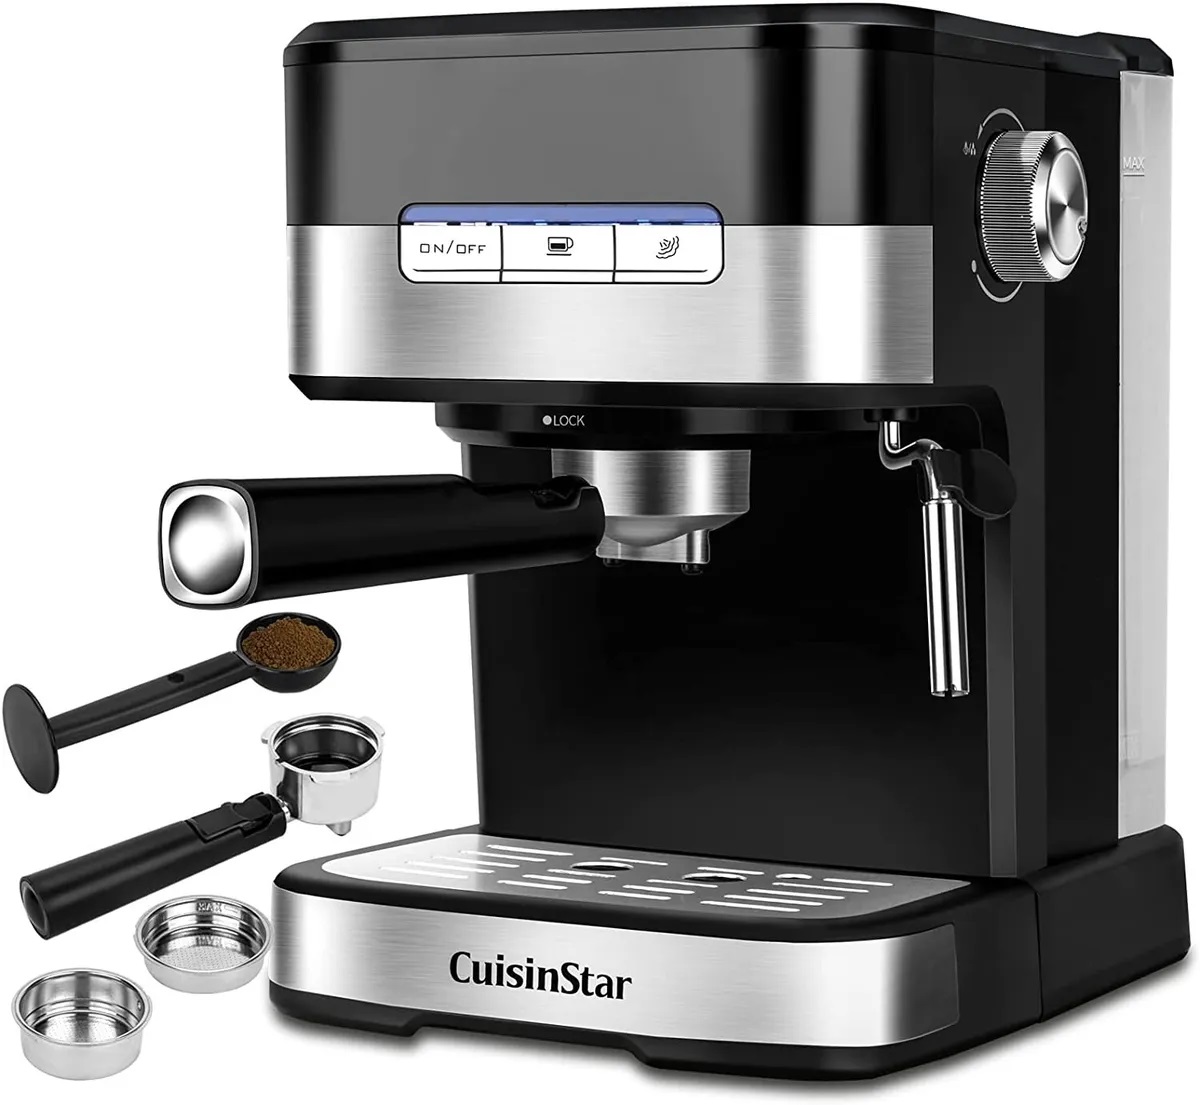 What Is The Difference Between A 15 Bar And 20 Bar Espresso Machine